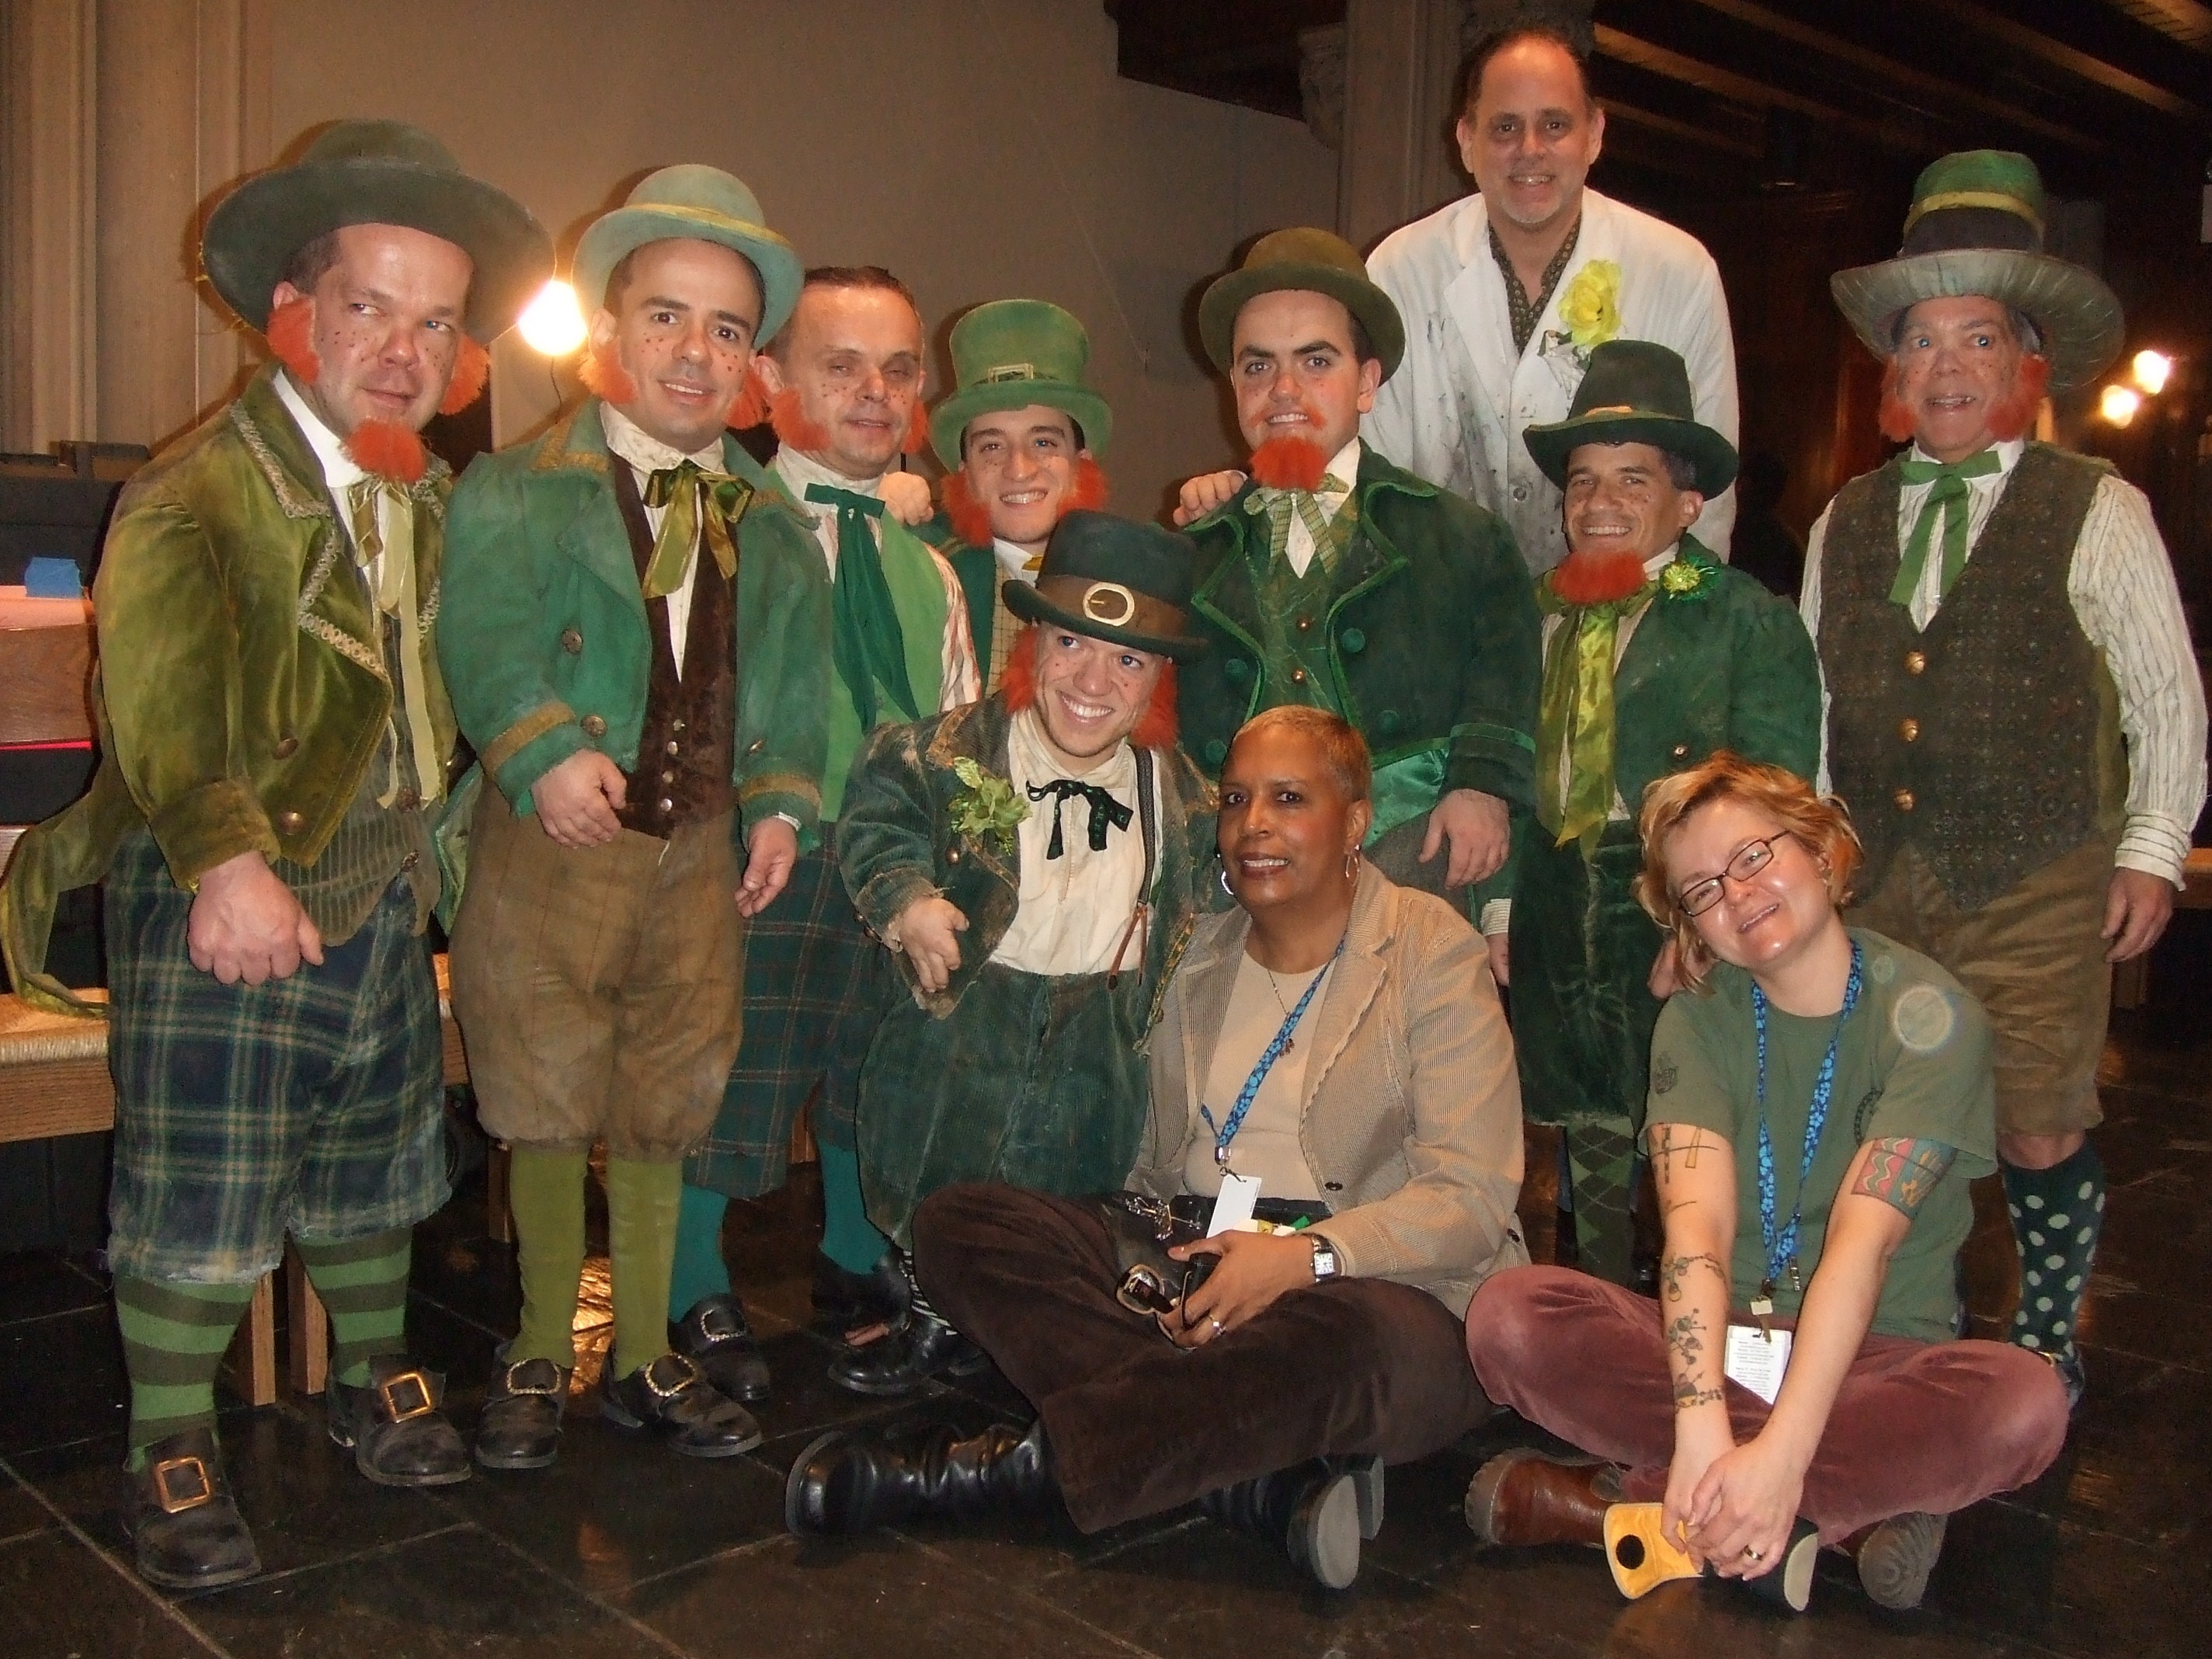 Boardwalk Empire, aged newly tailored leprechan costumes with designer John Dunn